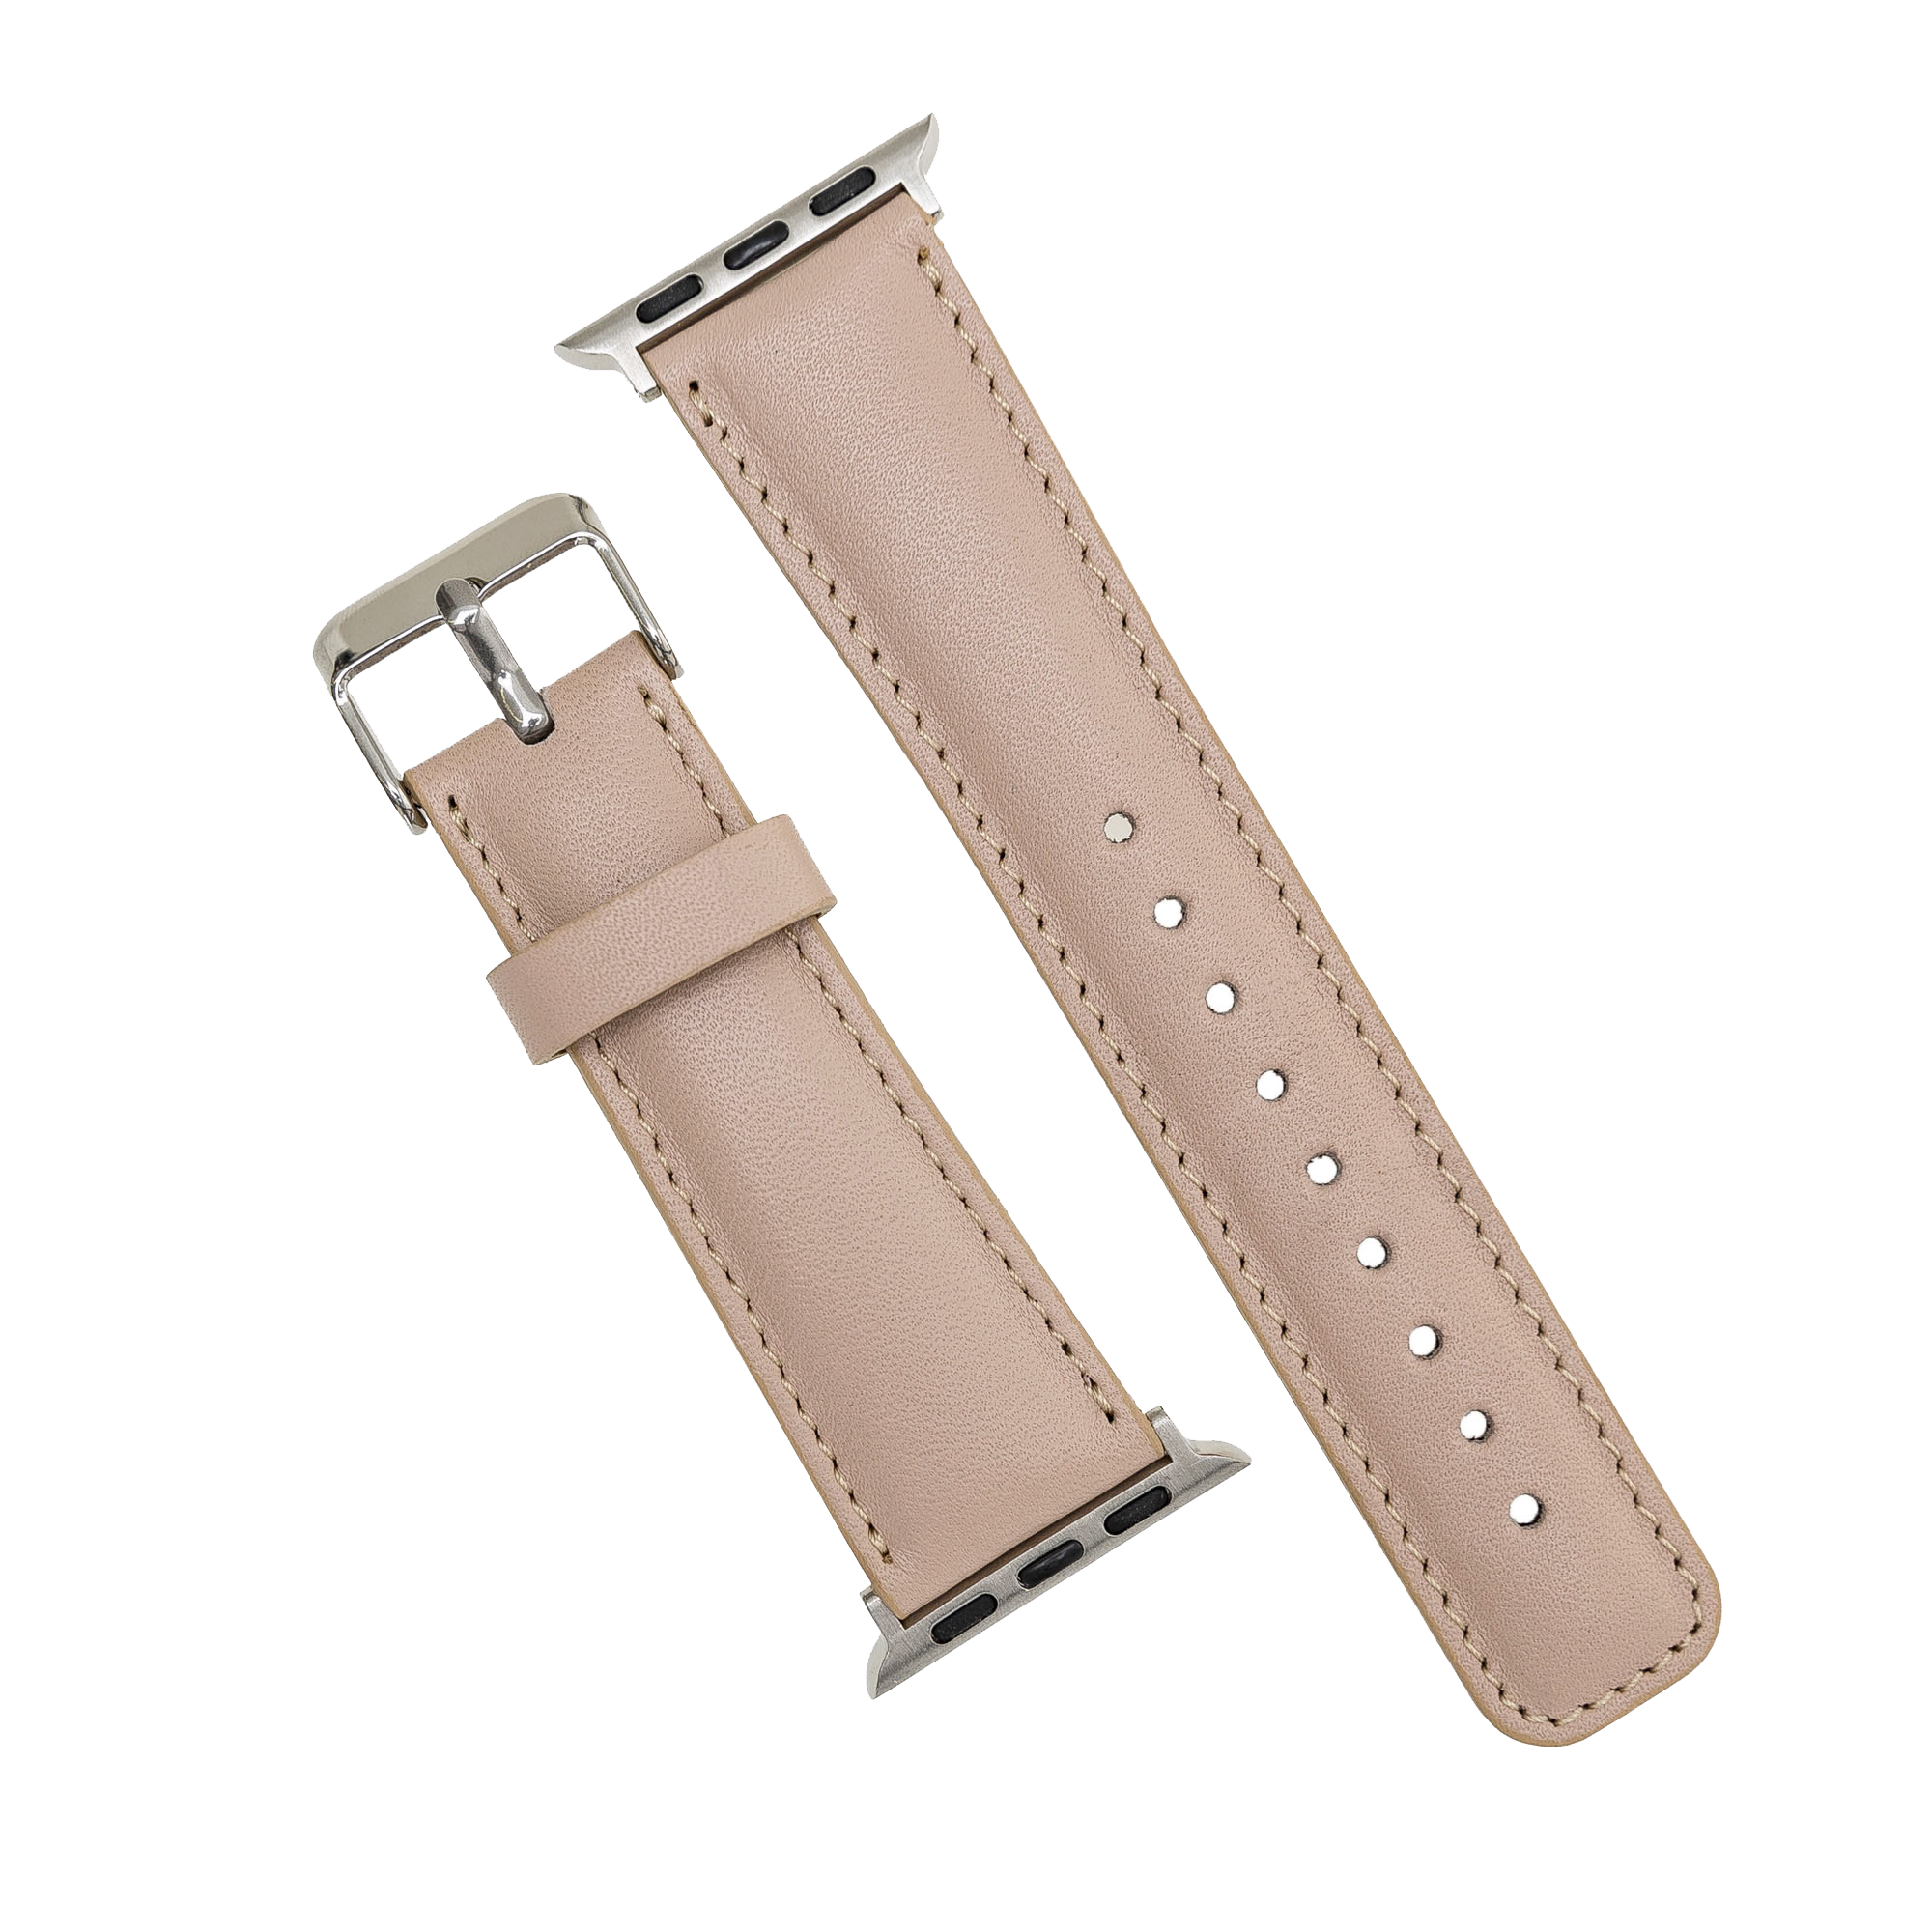 LupinnyLeather Liverpool Collection Leather Watch Band for Apple & Fitbit Versa Watch Band 4